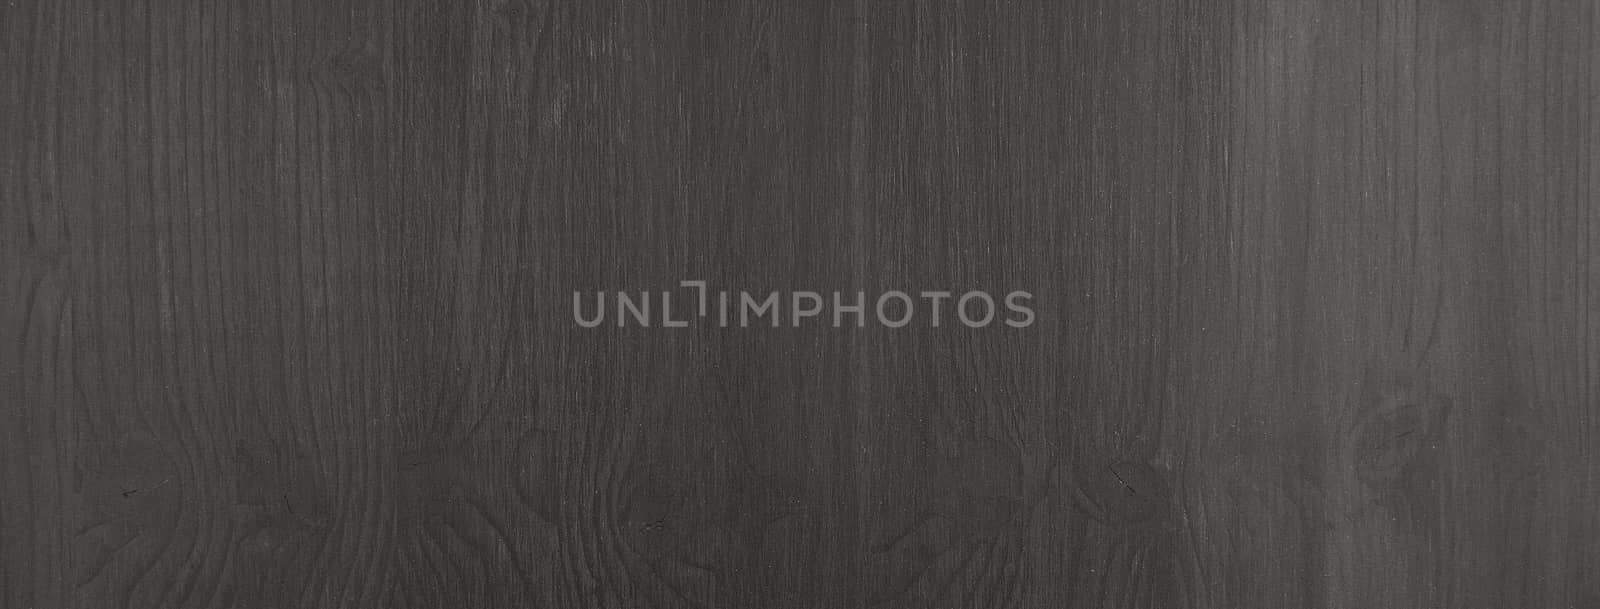 Texture of a black wooden board by marcorubino